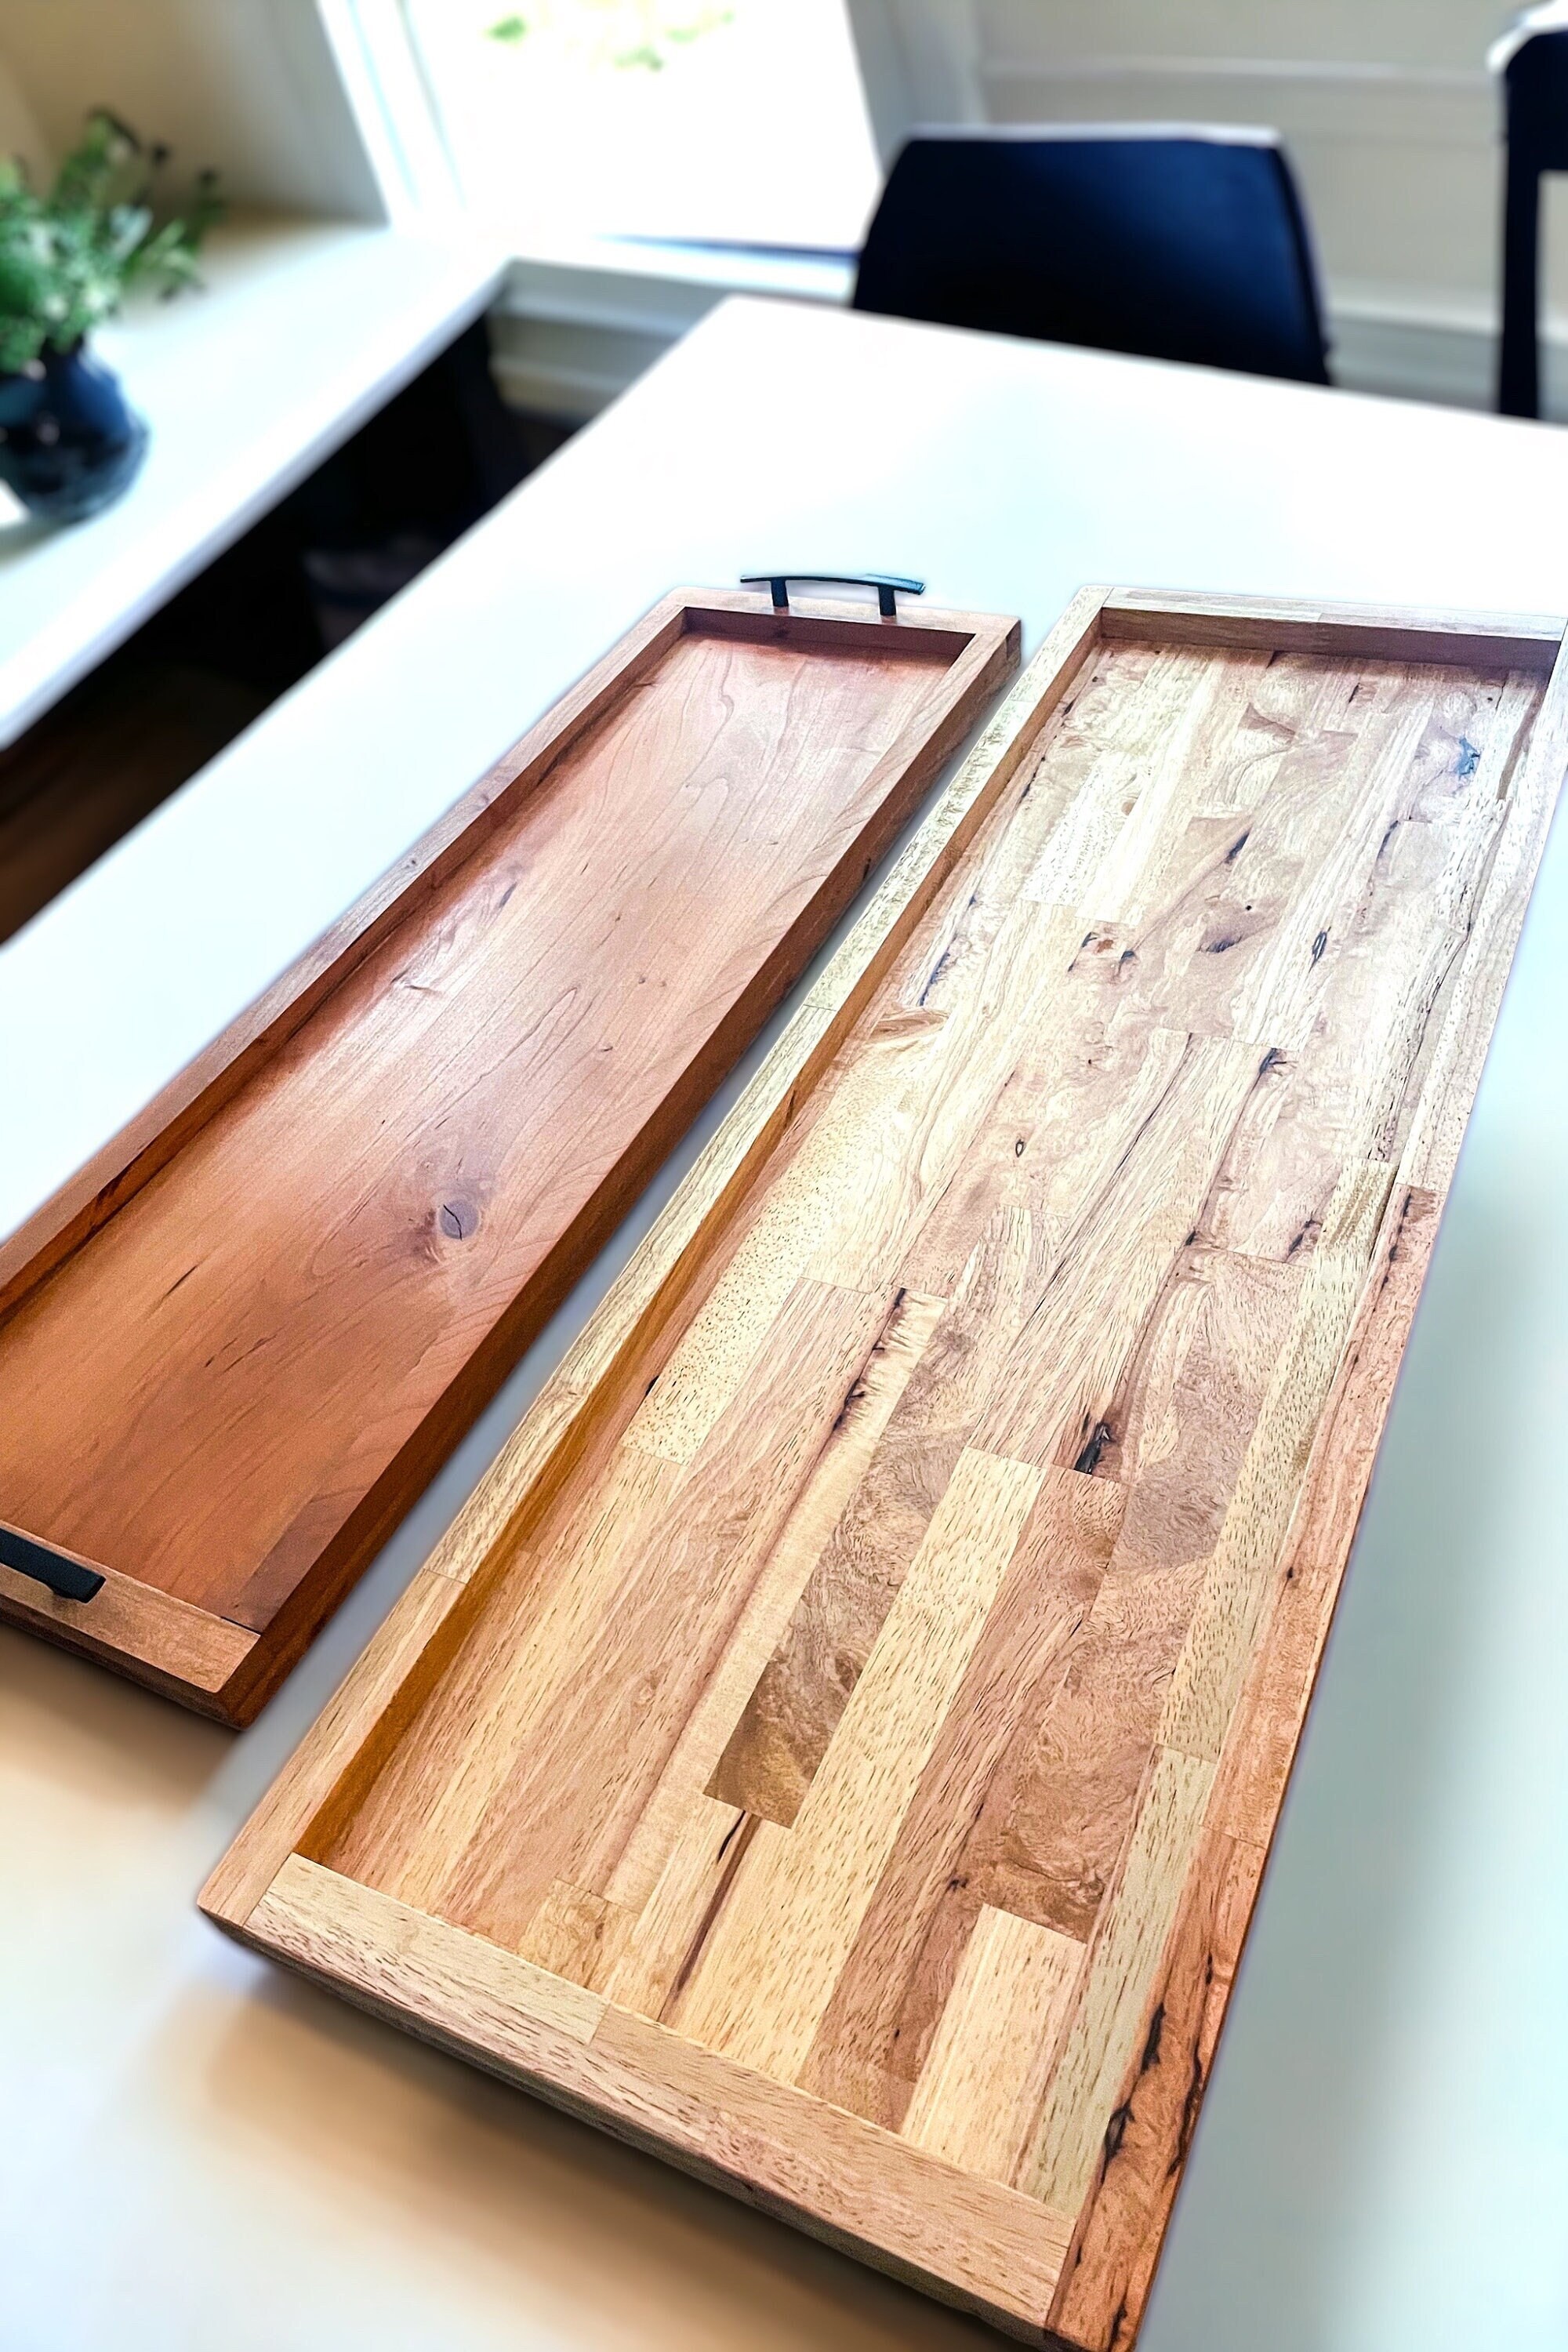  Denmark Tools for Cooks Artisan Acacia Serving Collection- Wood Cutting  Chopping Board Platter Tray, 2 Piece Rectangular Footed Charcuterie/Cutting  Boards: Home & Kitchen